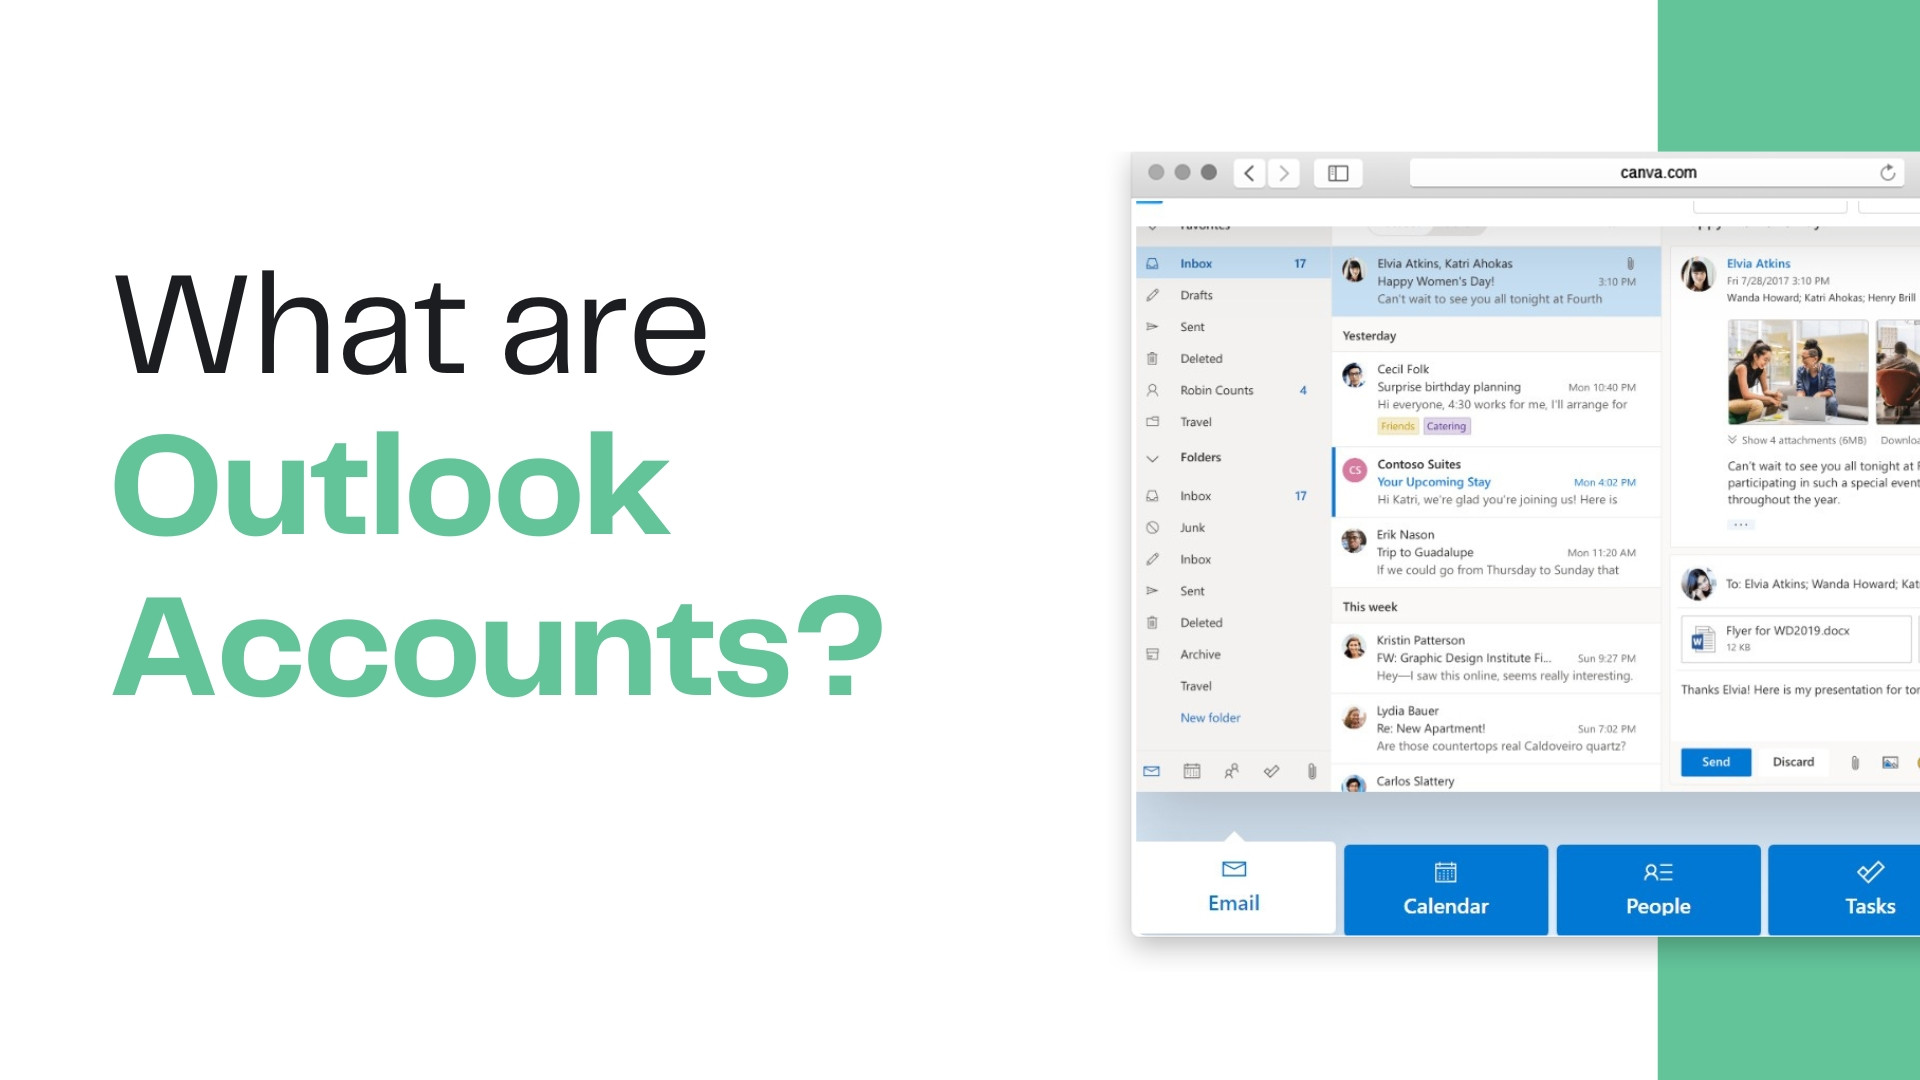 What are Outlook Accounts?